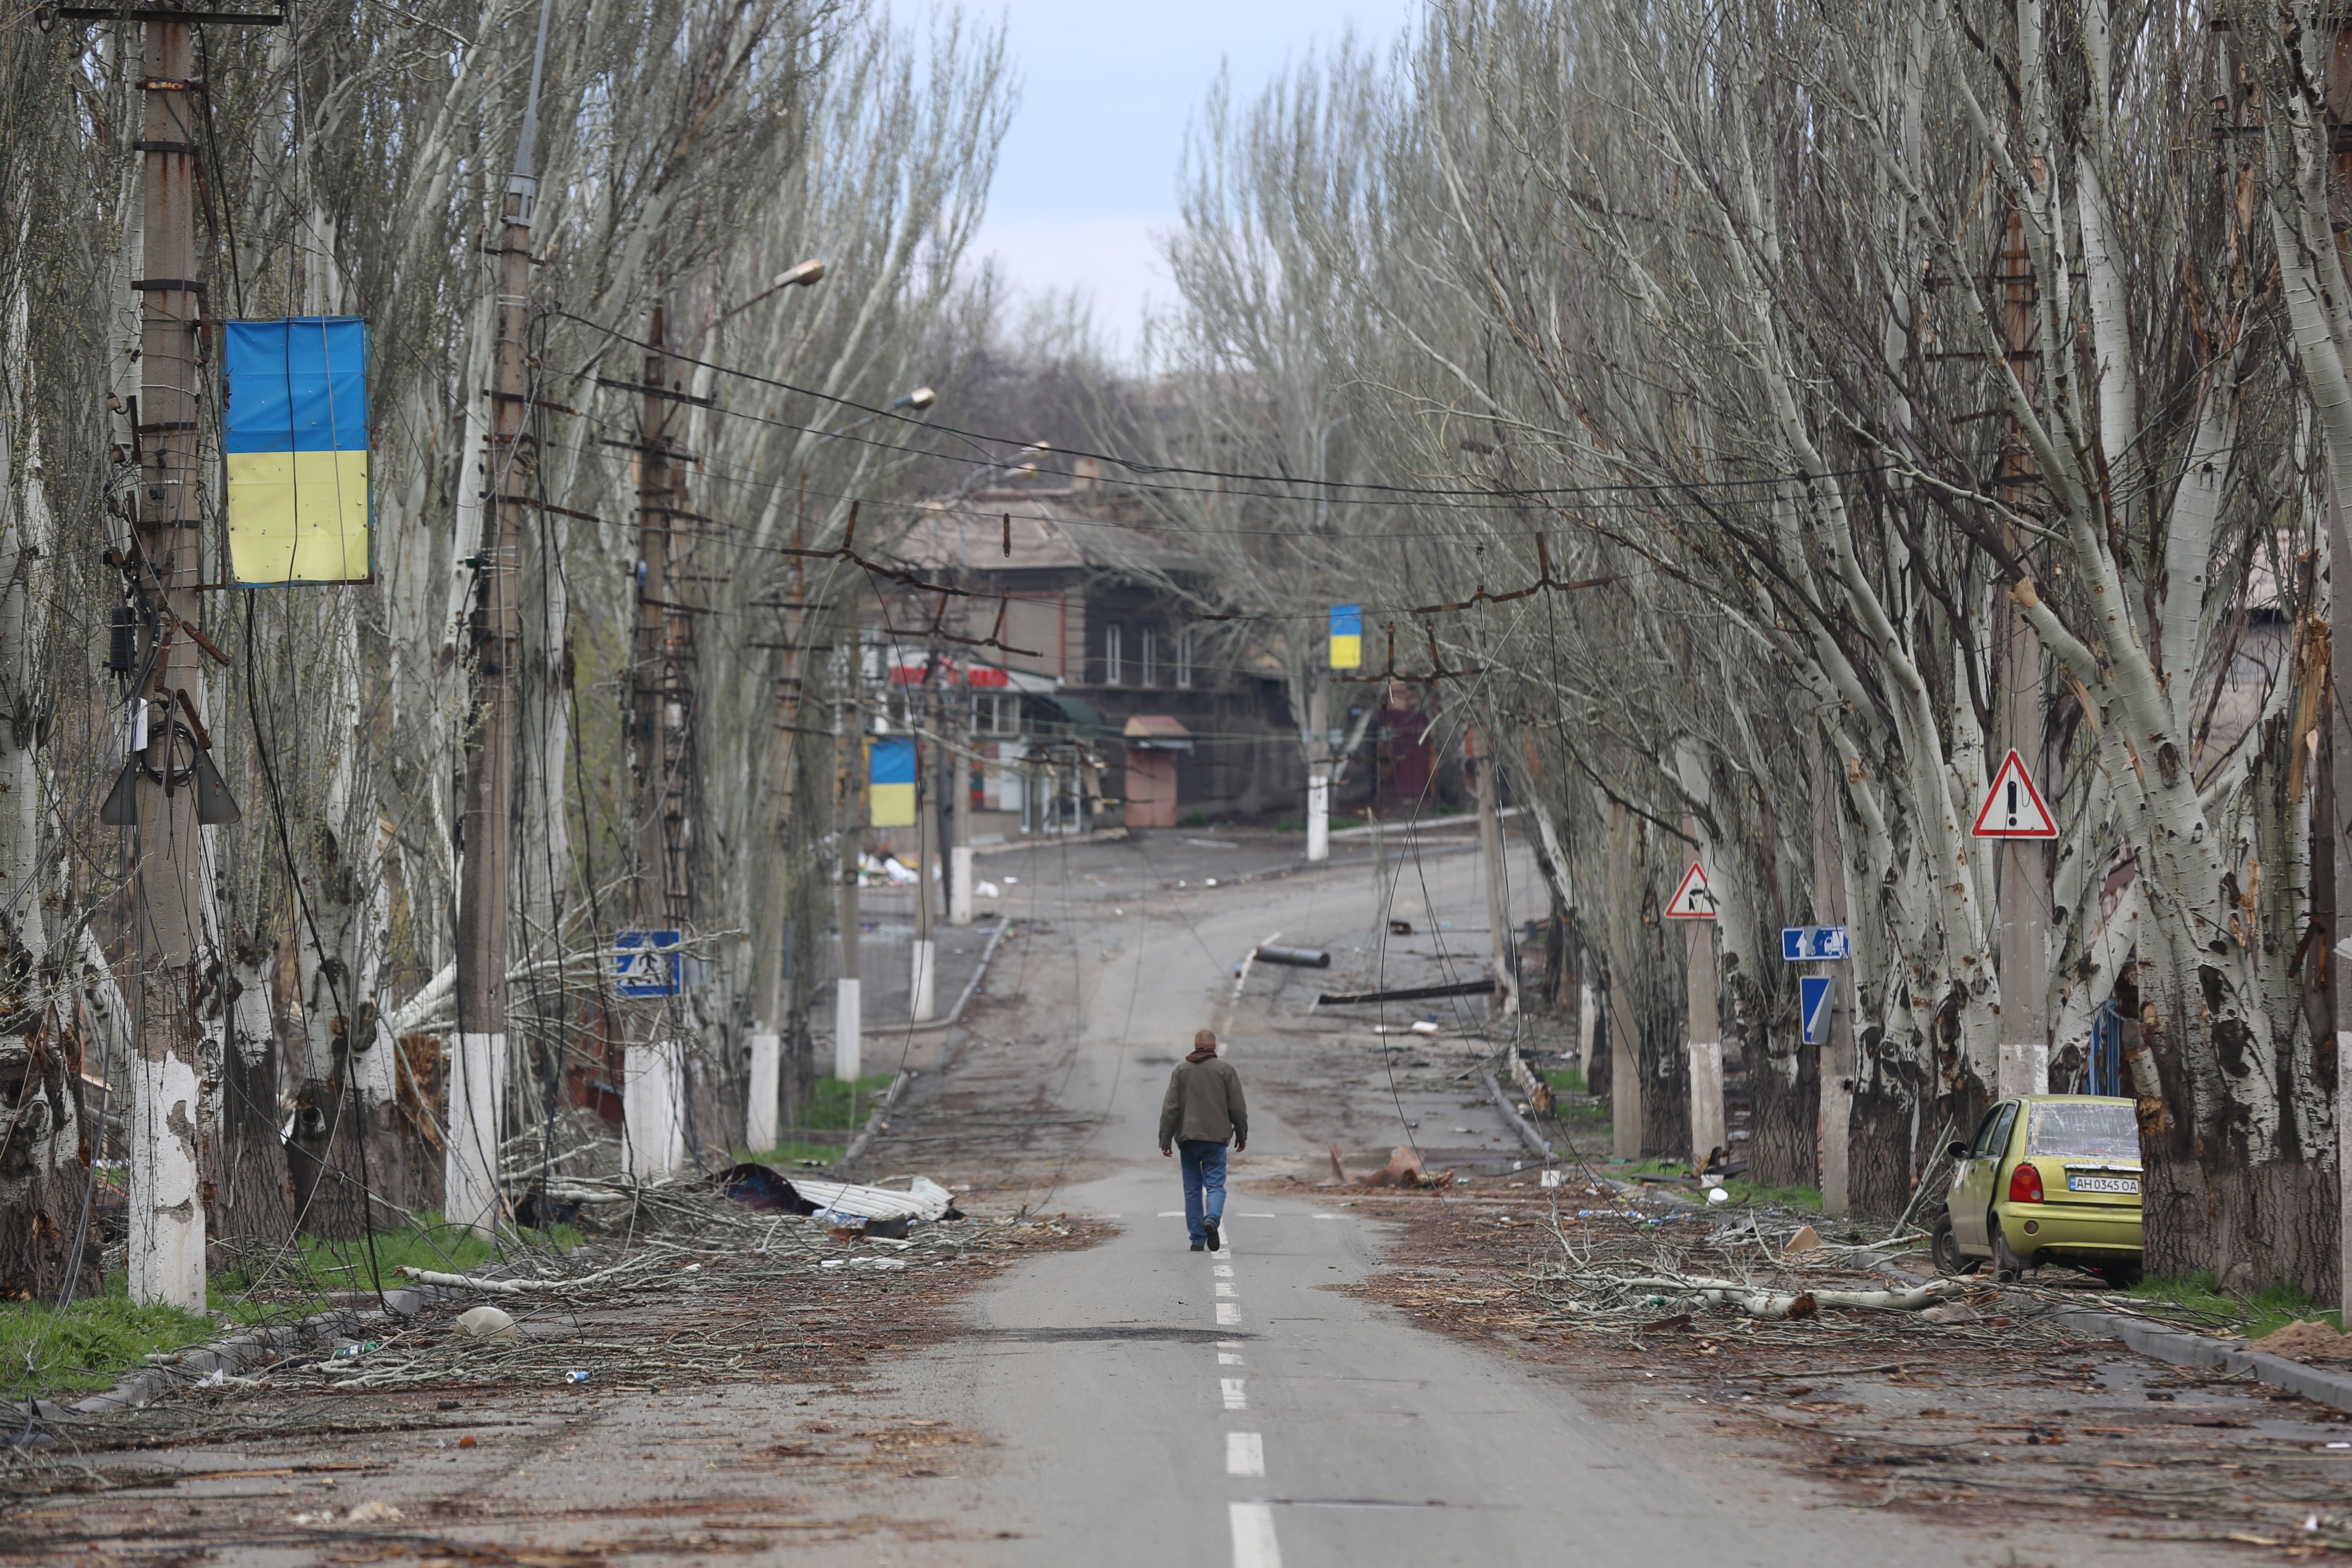 Mariupol&#039;s last stronghold Azovstal plant still resists against Russian forces